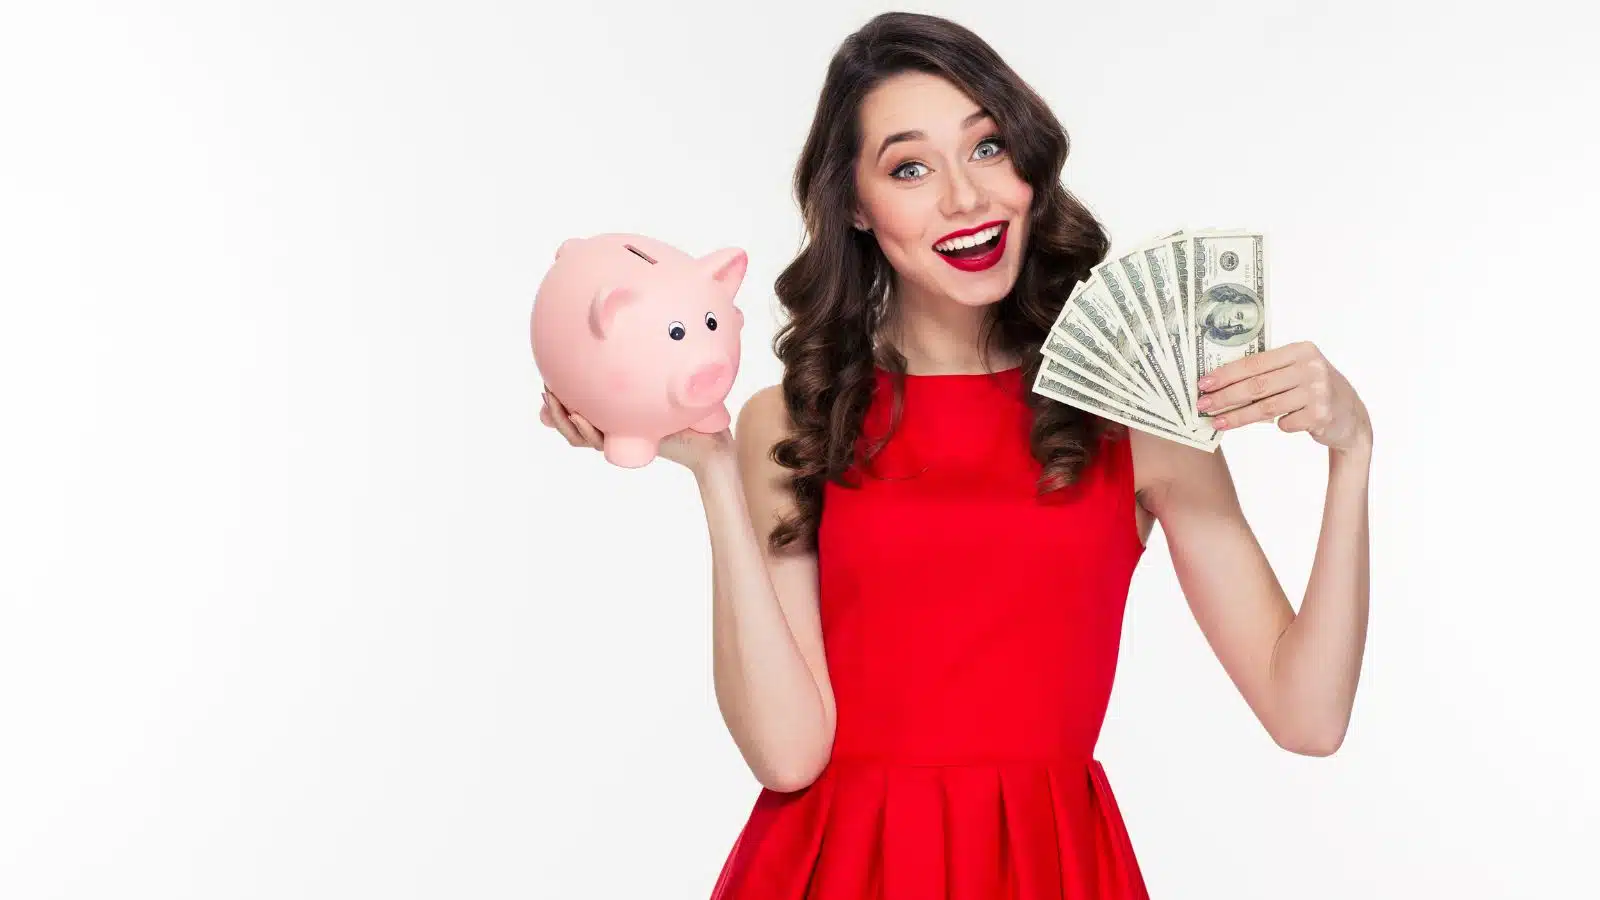 10 Top Things Women Spend a Lot of Money On That’s "Worth It"